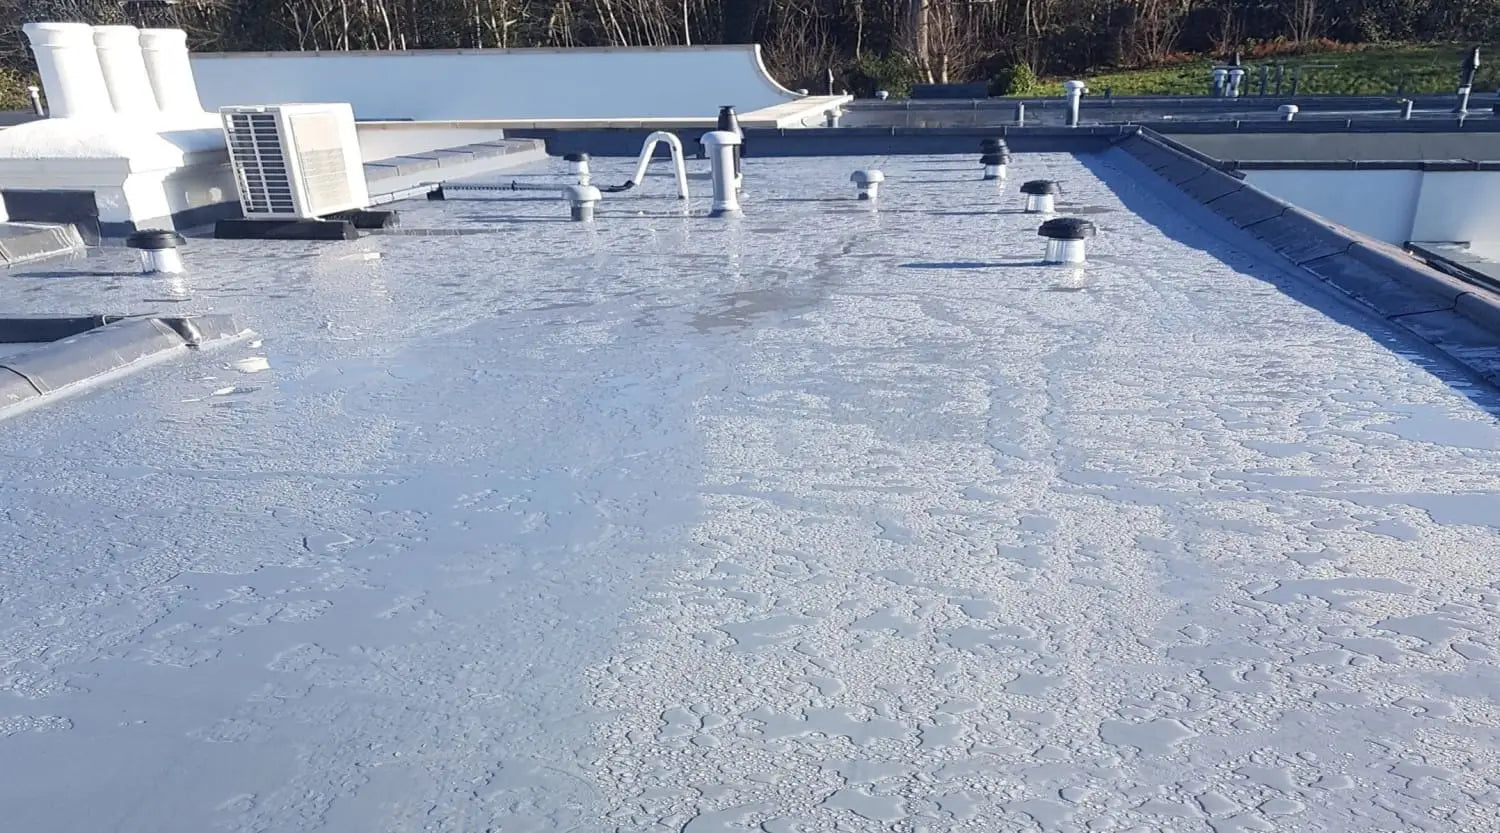 Liquid SilaCote flat roof membranes and structural waterproof coating specialists. Hand or spray applied to new and refurbished flat roofing for long lasting asset protection. Fully BBA and ETAG compliant